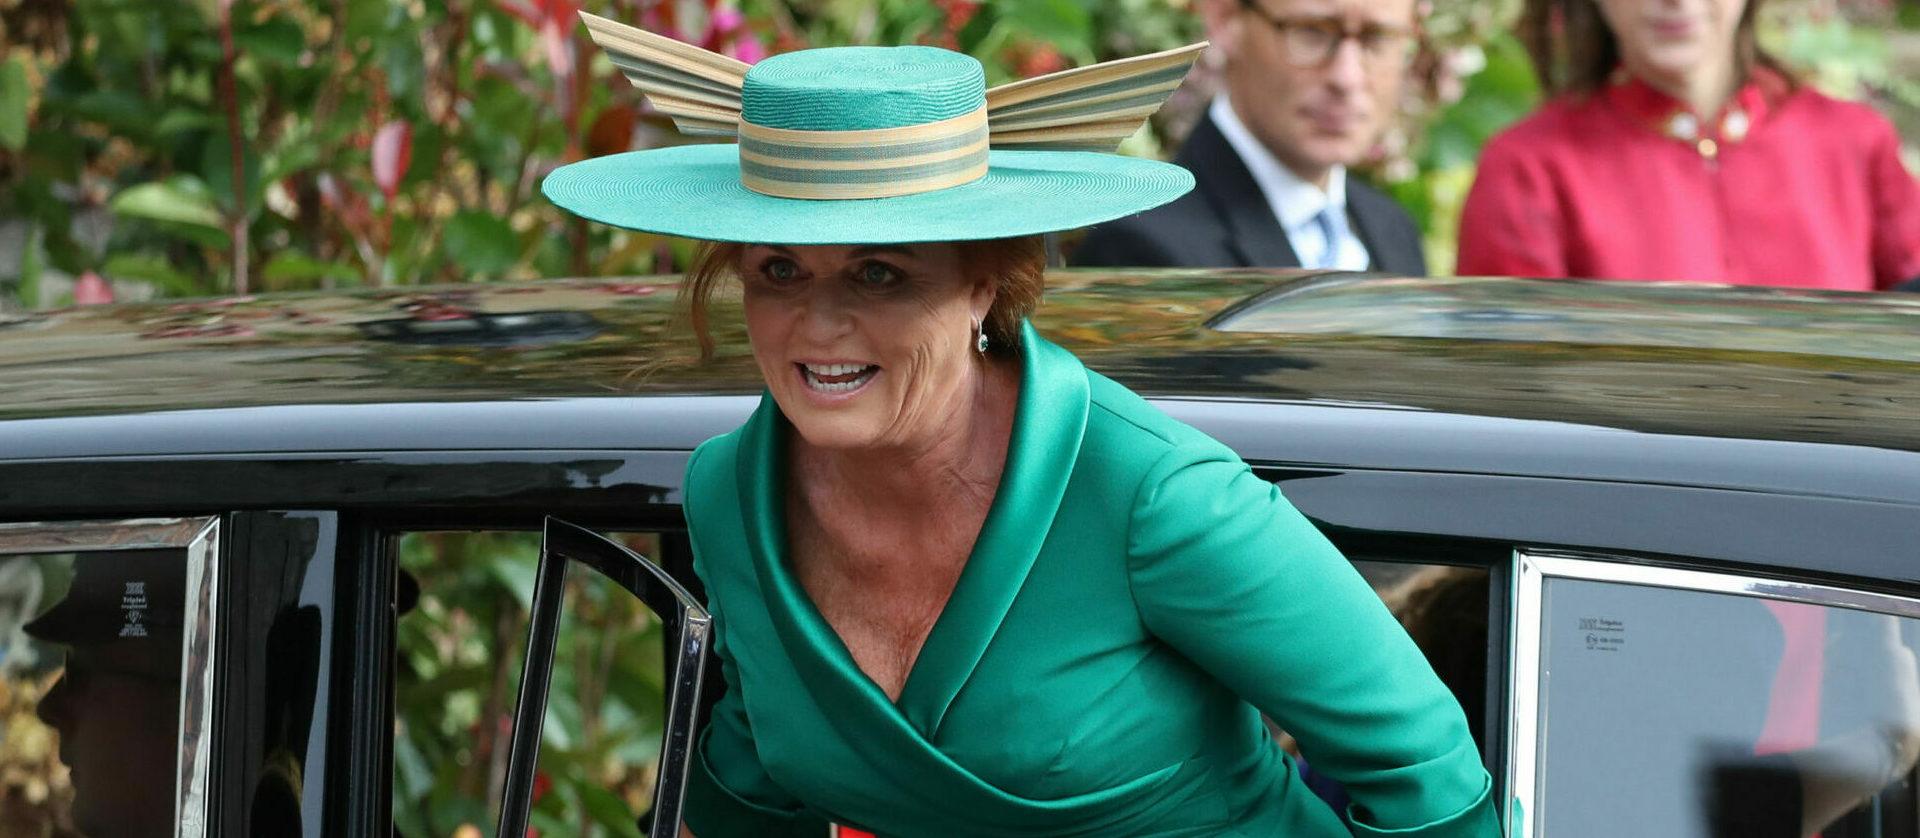 Sarah Ferguson Gushes About Being ‘Really Touched’ By New Grandson’s Name